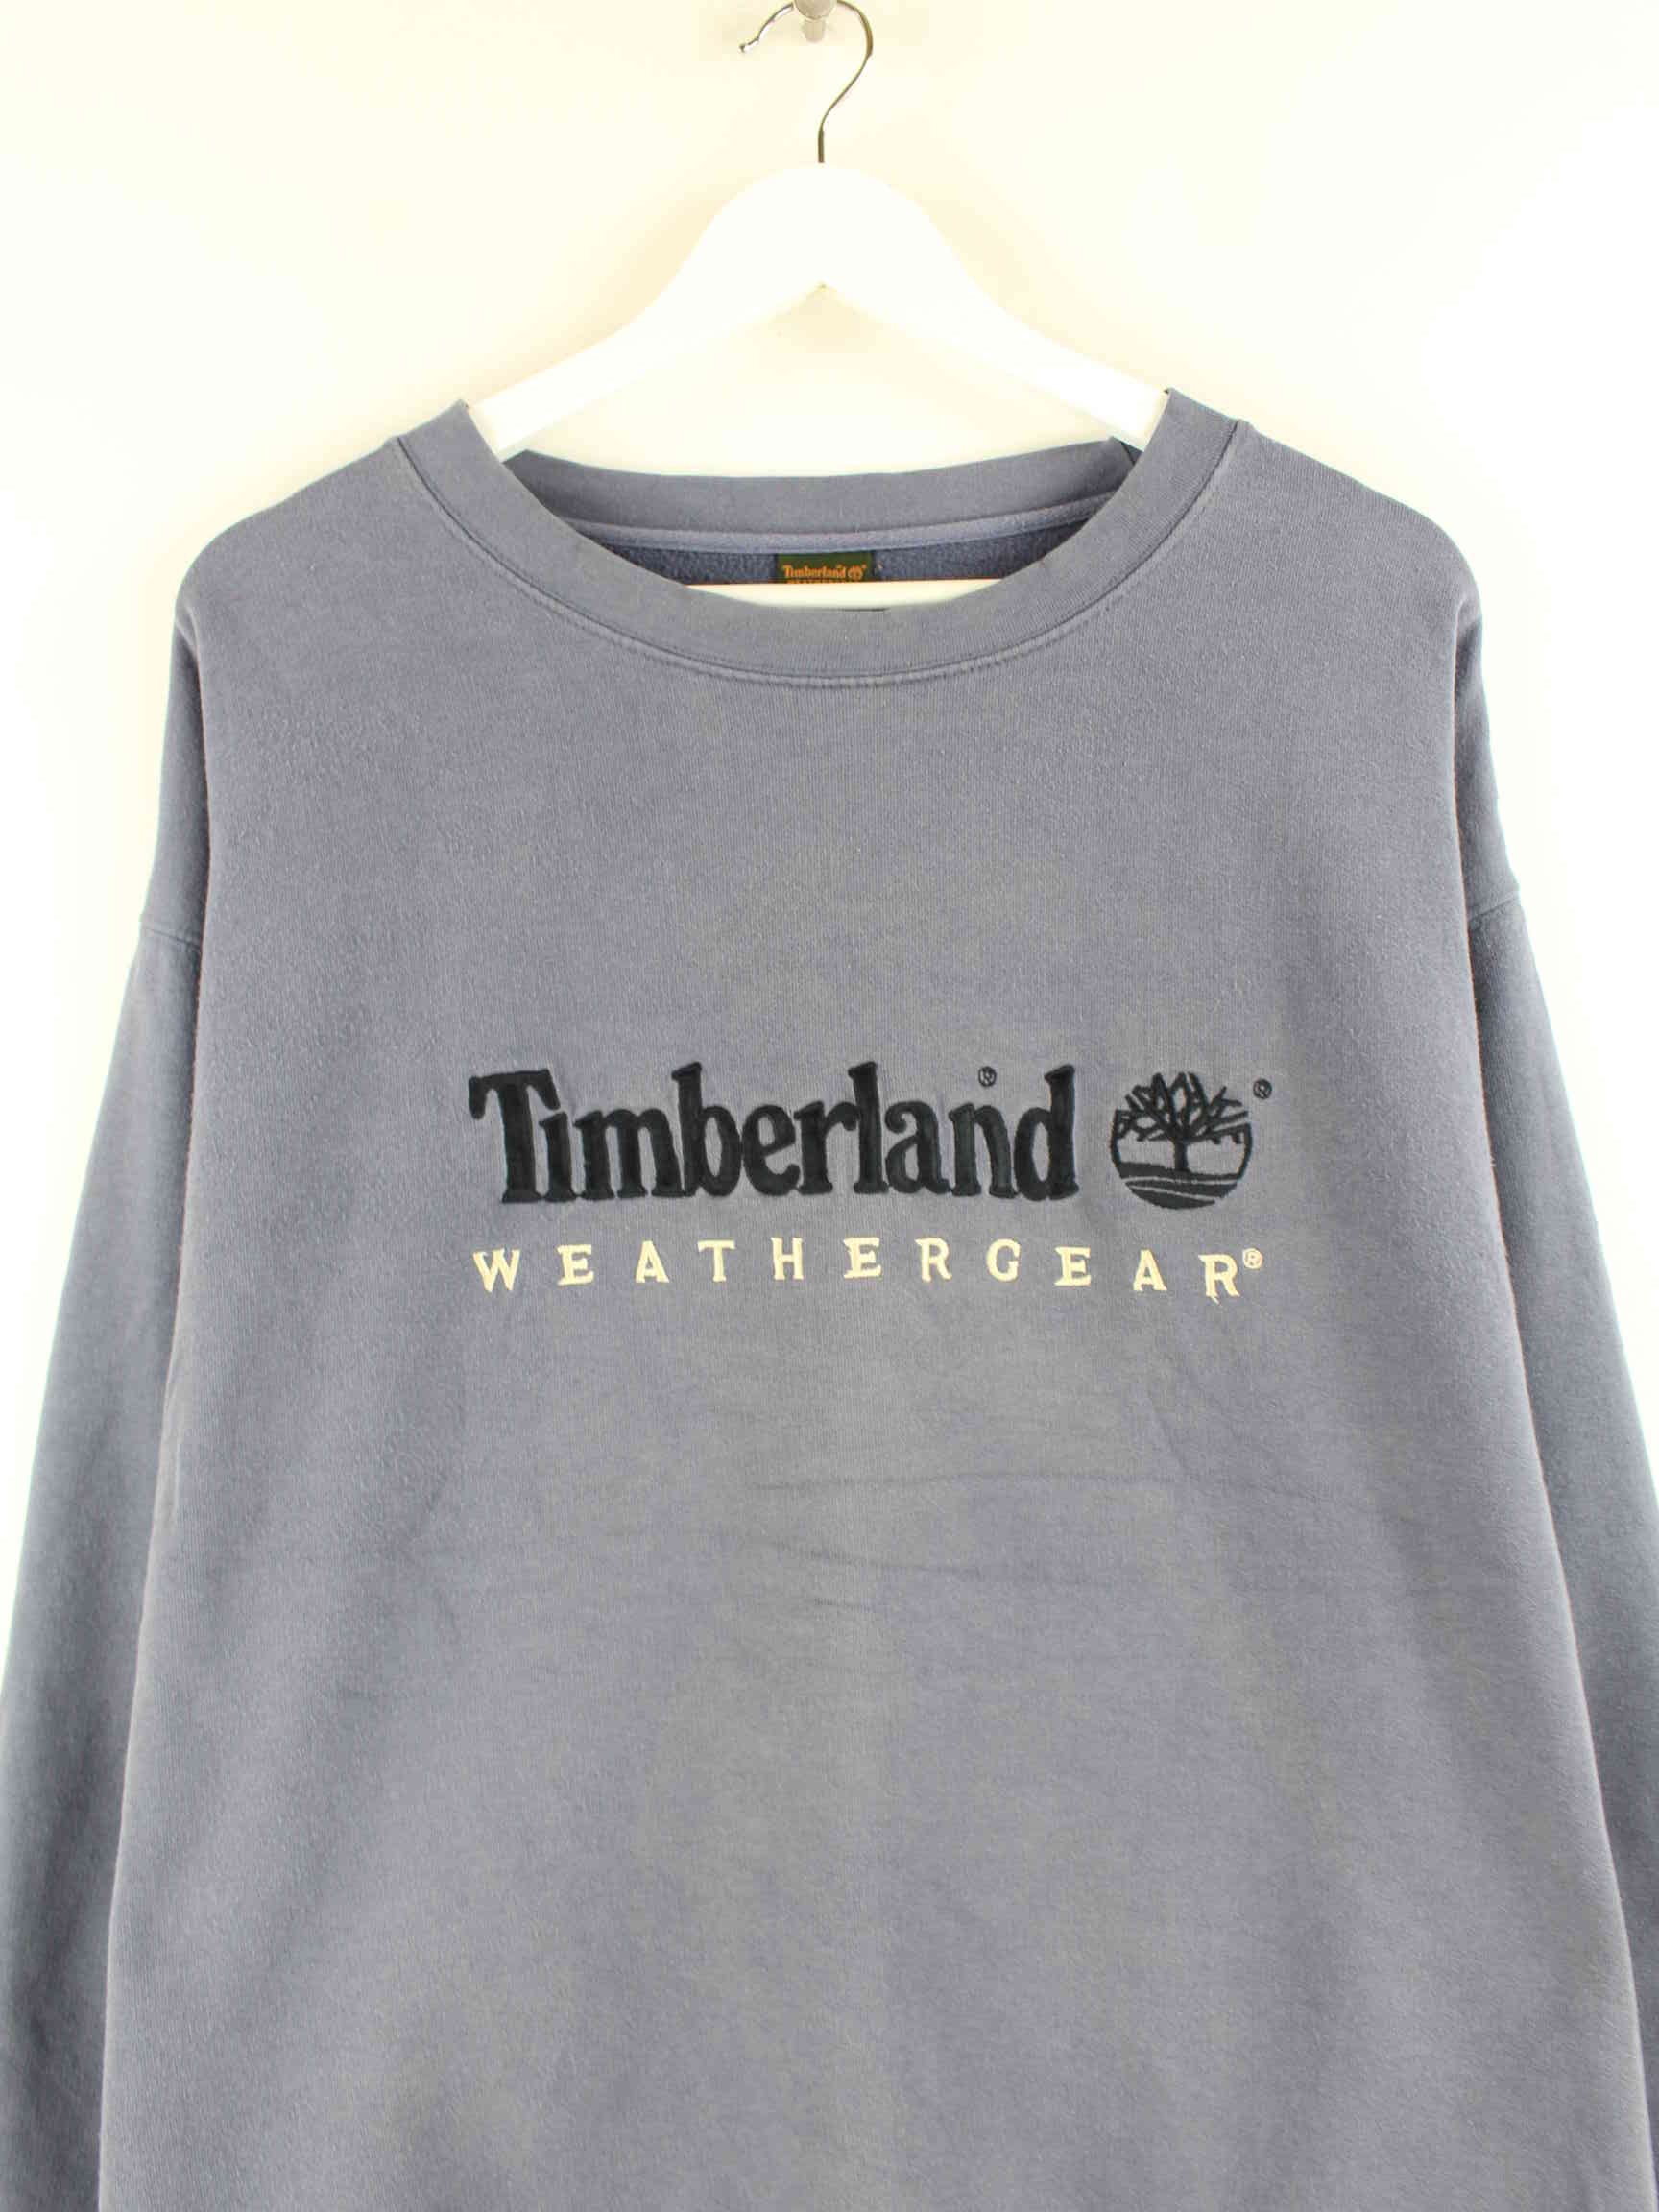 Timberland 90s Vintage Embroidered Sweater Blau XXL (detail image 1)